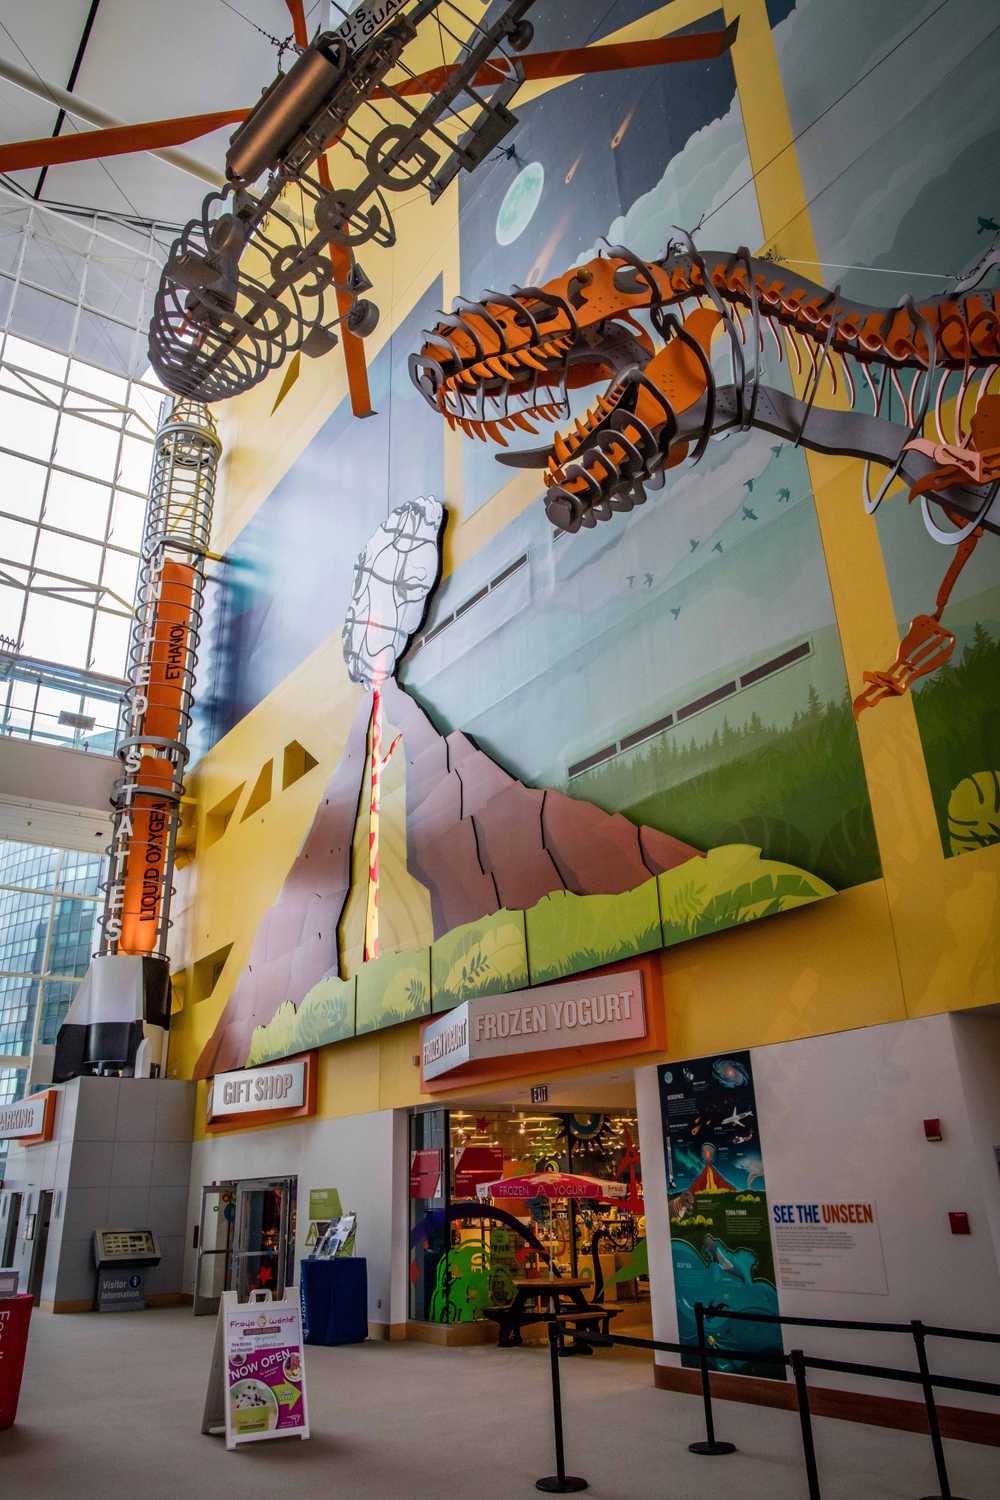 A tall atrium space with sculptures of a tornado, a rainstorm, a helicopter and a t-rex.